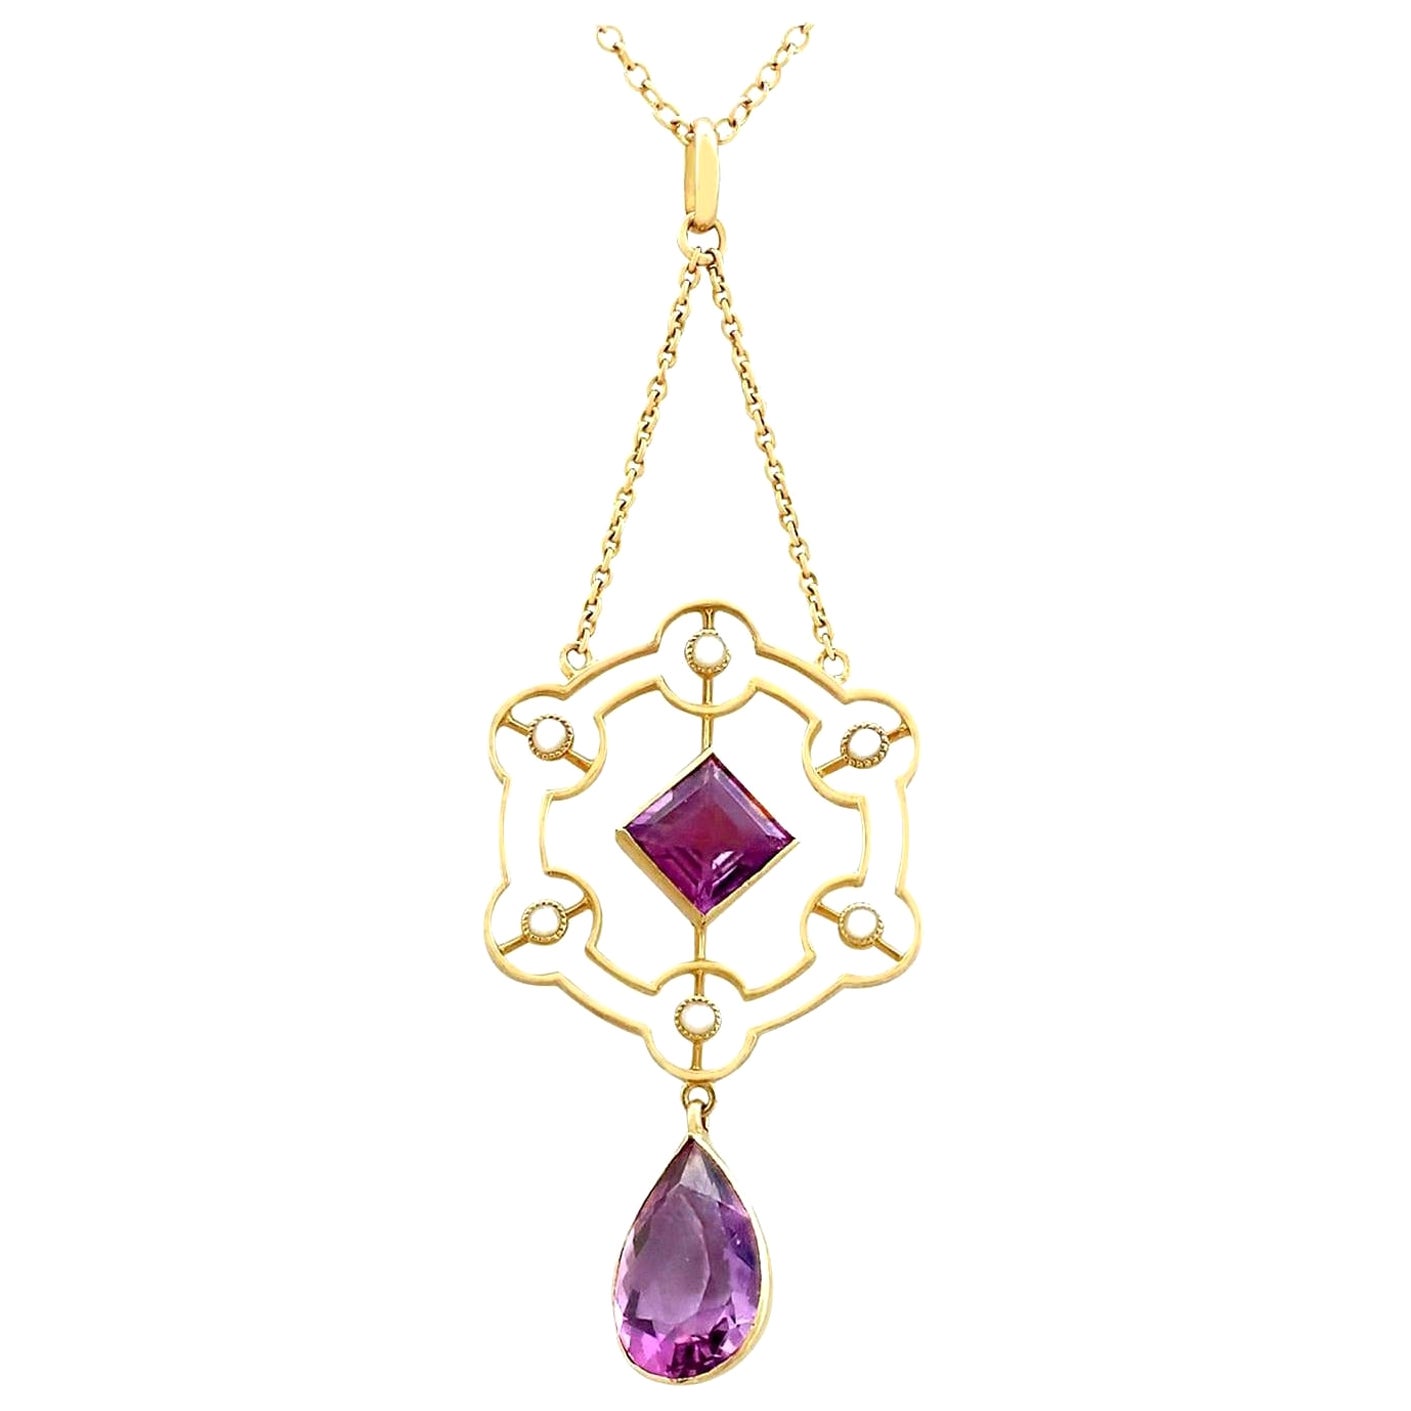 Victorian 2.40 Carat Amethyst and Pearl Yellow Gold Pendant